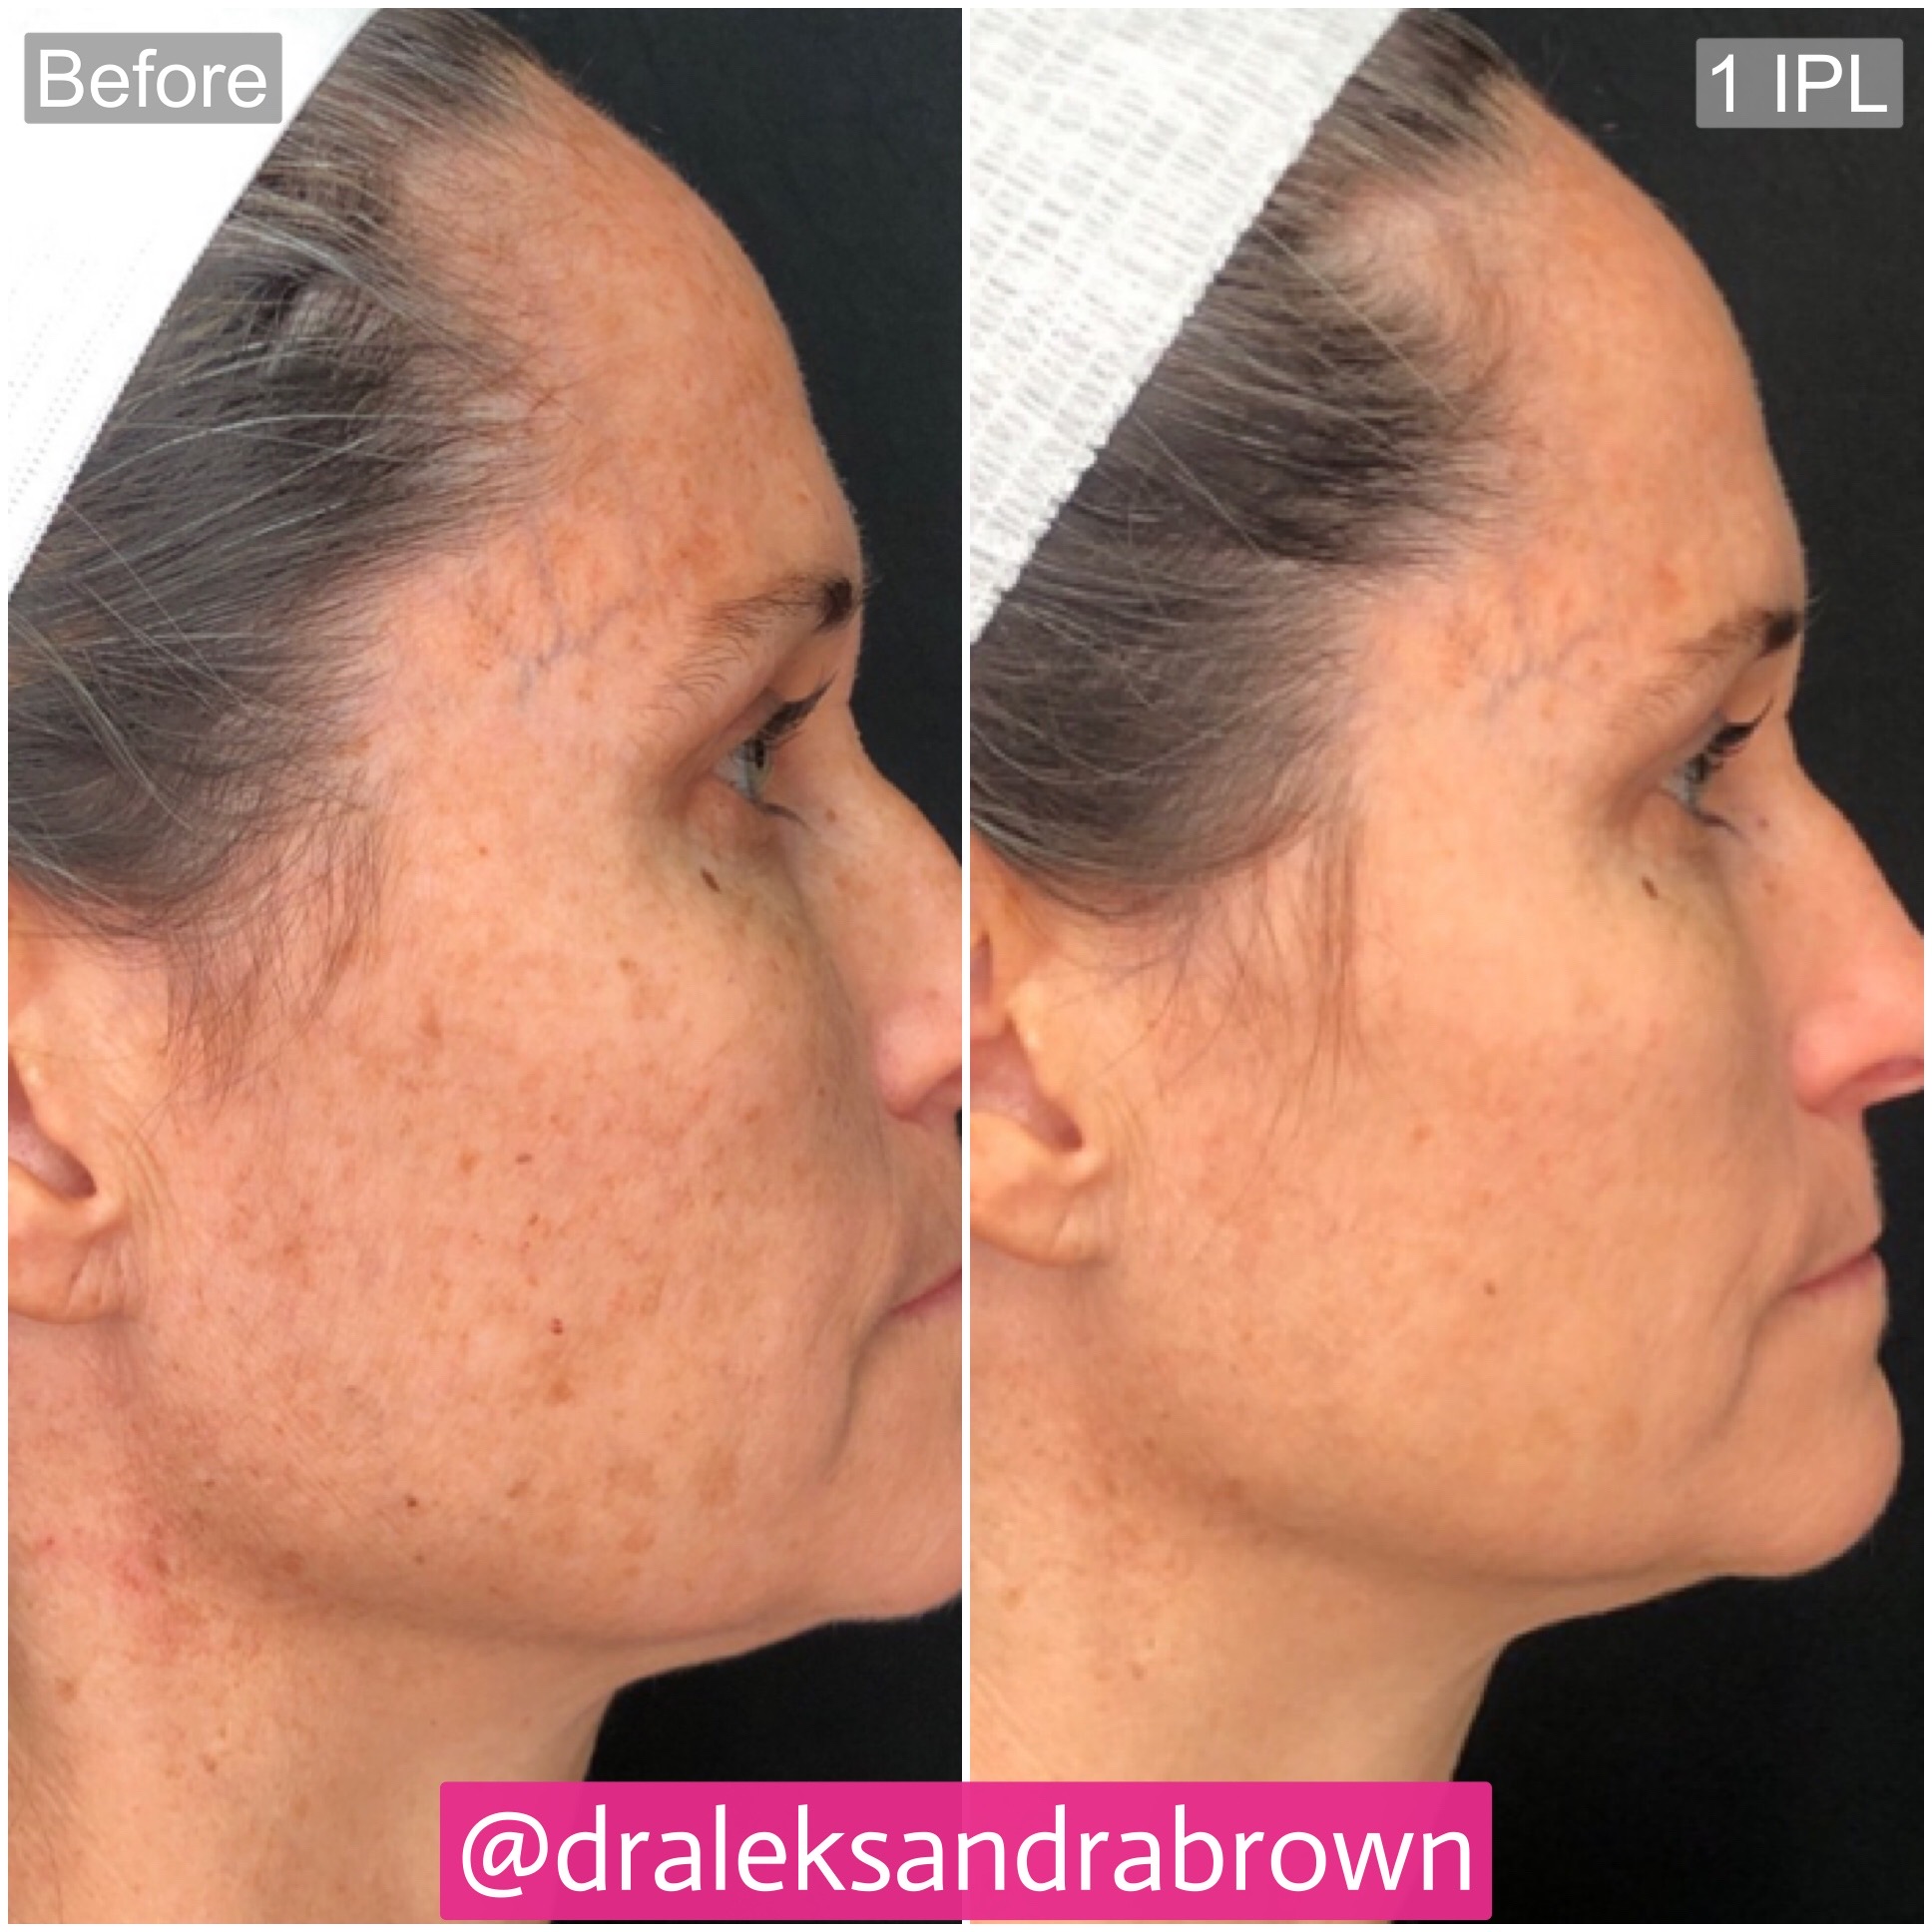 A before and after photo of brown spot removal